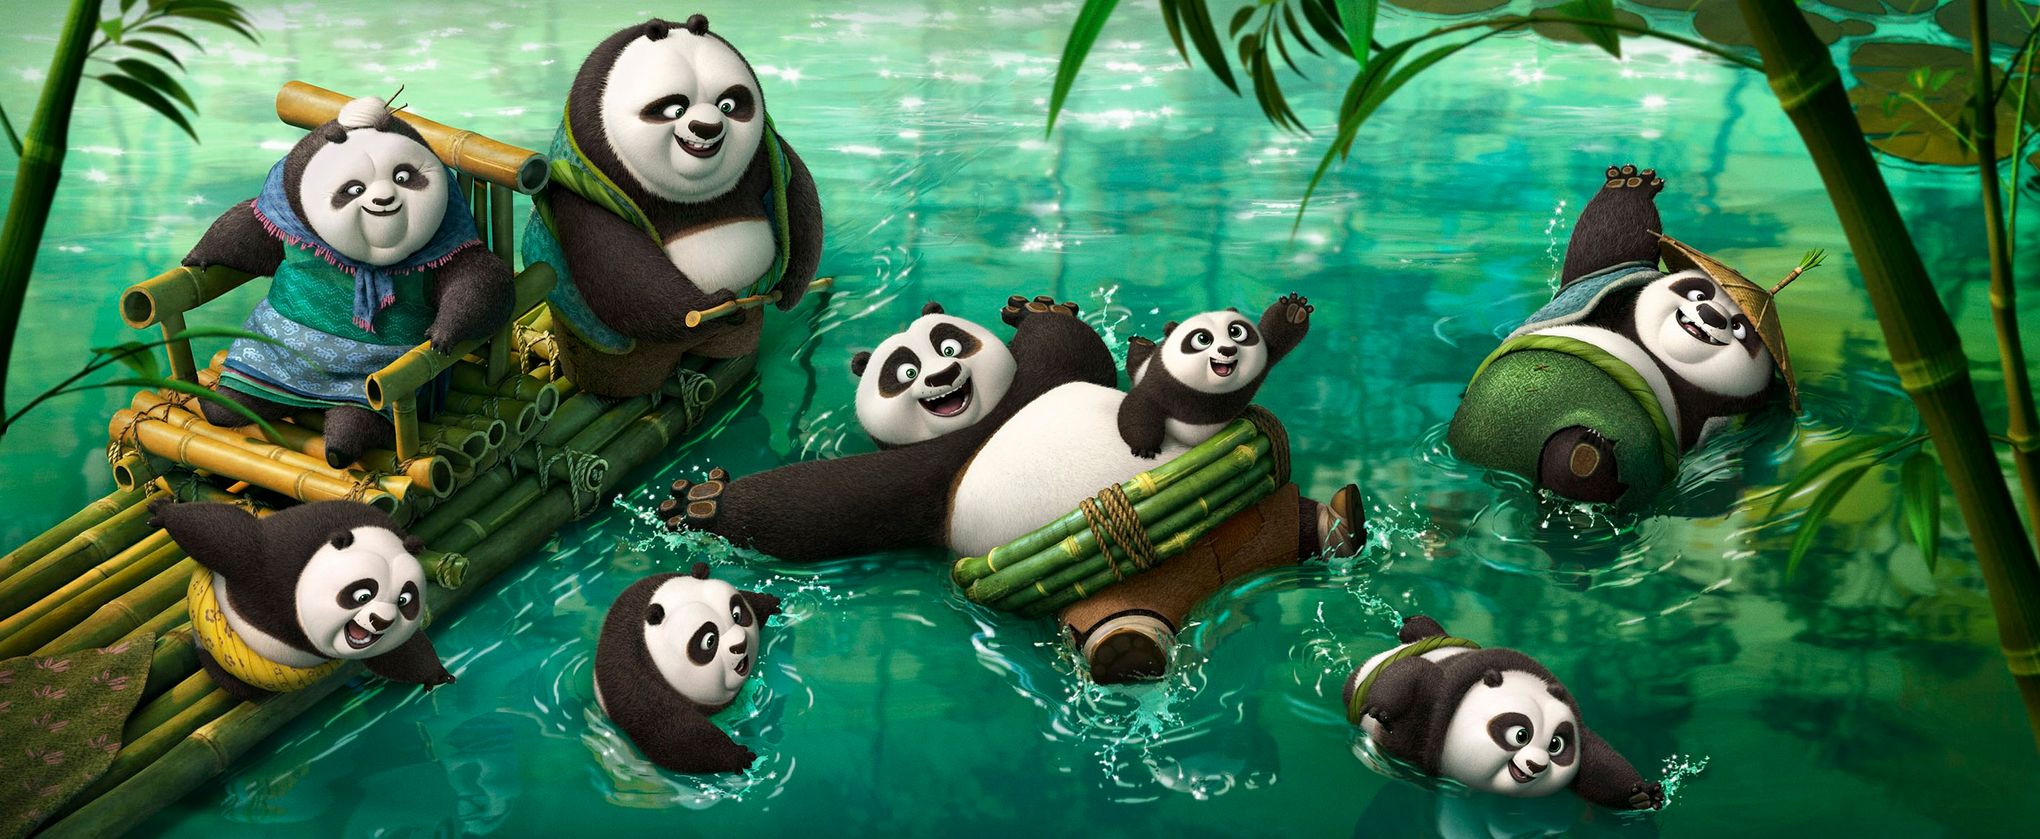 Kung Fu Panda 3': a delightful kick (yes, even in its third